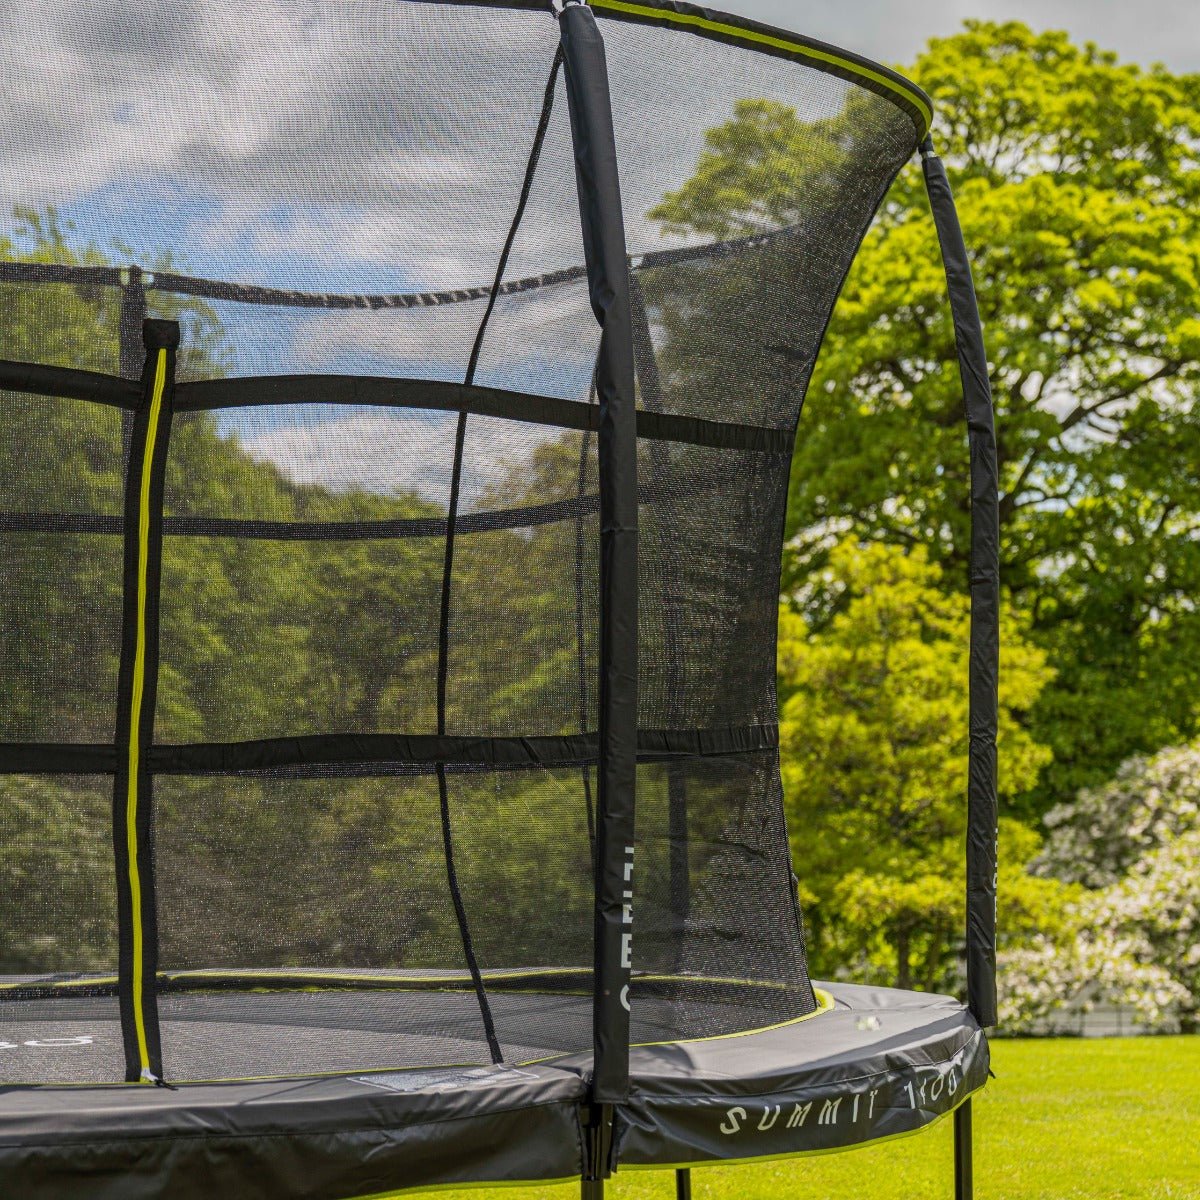 Rebo Summit Oval Trampoline and Safety Enclosure - Summit 1400